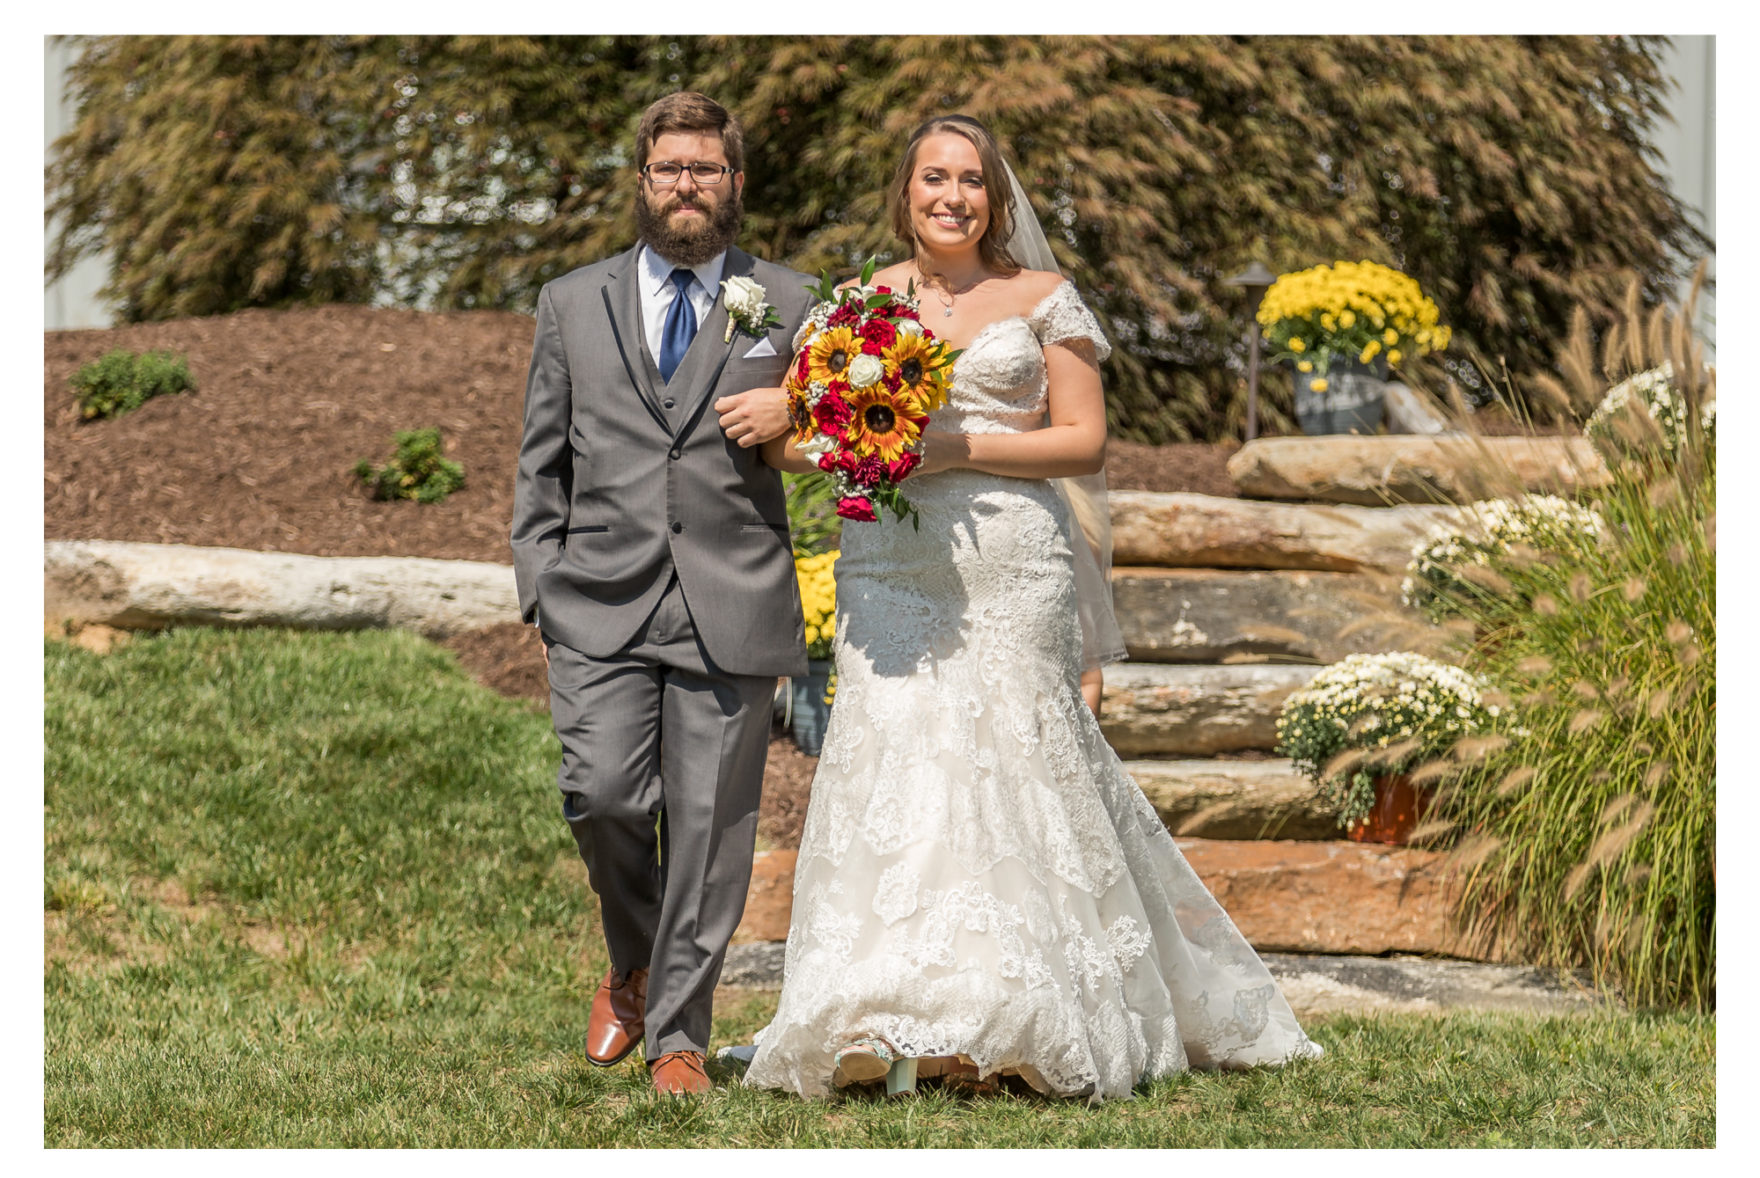 September Wedding. Fall Wedding. Hot September Day. Frederick Wedding Photographer. Stone Ridge Hollow. Forest Hill Maryland. Frederick Weddings. Sunflowers and Mums. Fall wedding decor. Waterfront Wedding. Farm Wedding. Barn Wedding. Deceased father of the bride. 